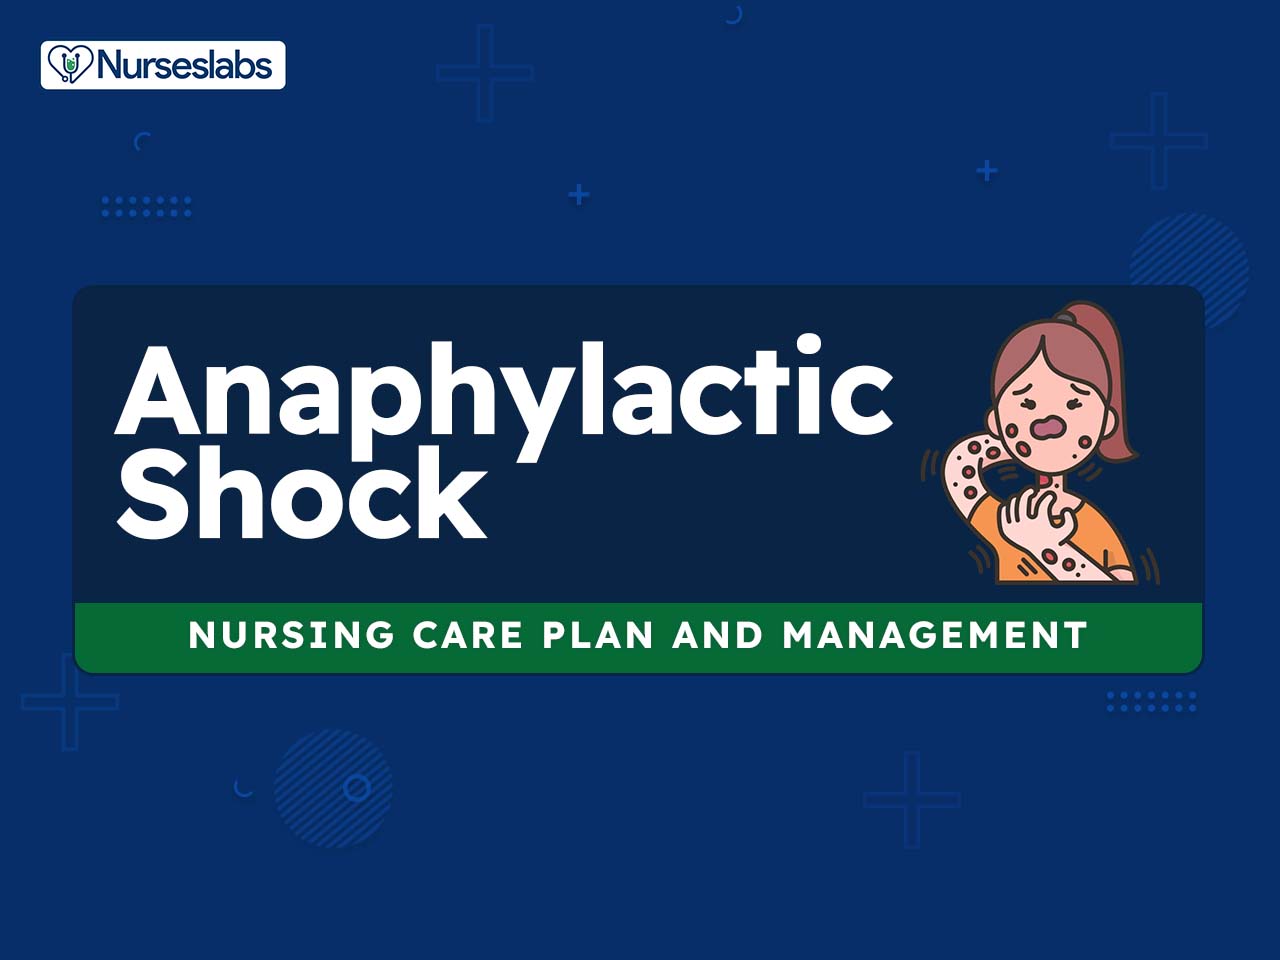 anaphylaxis shock treatment